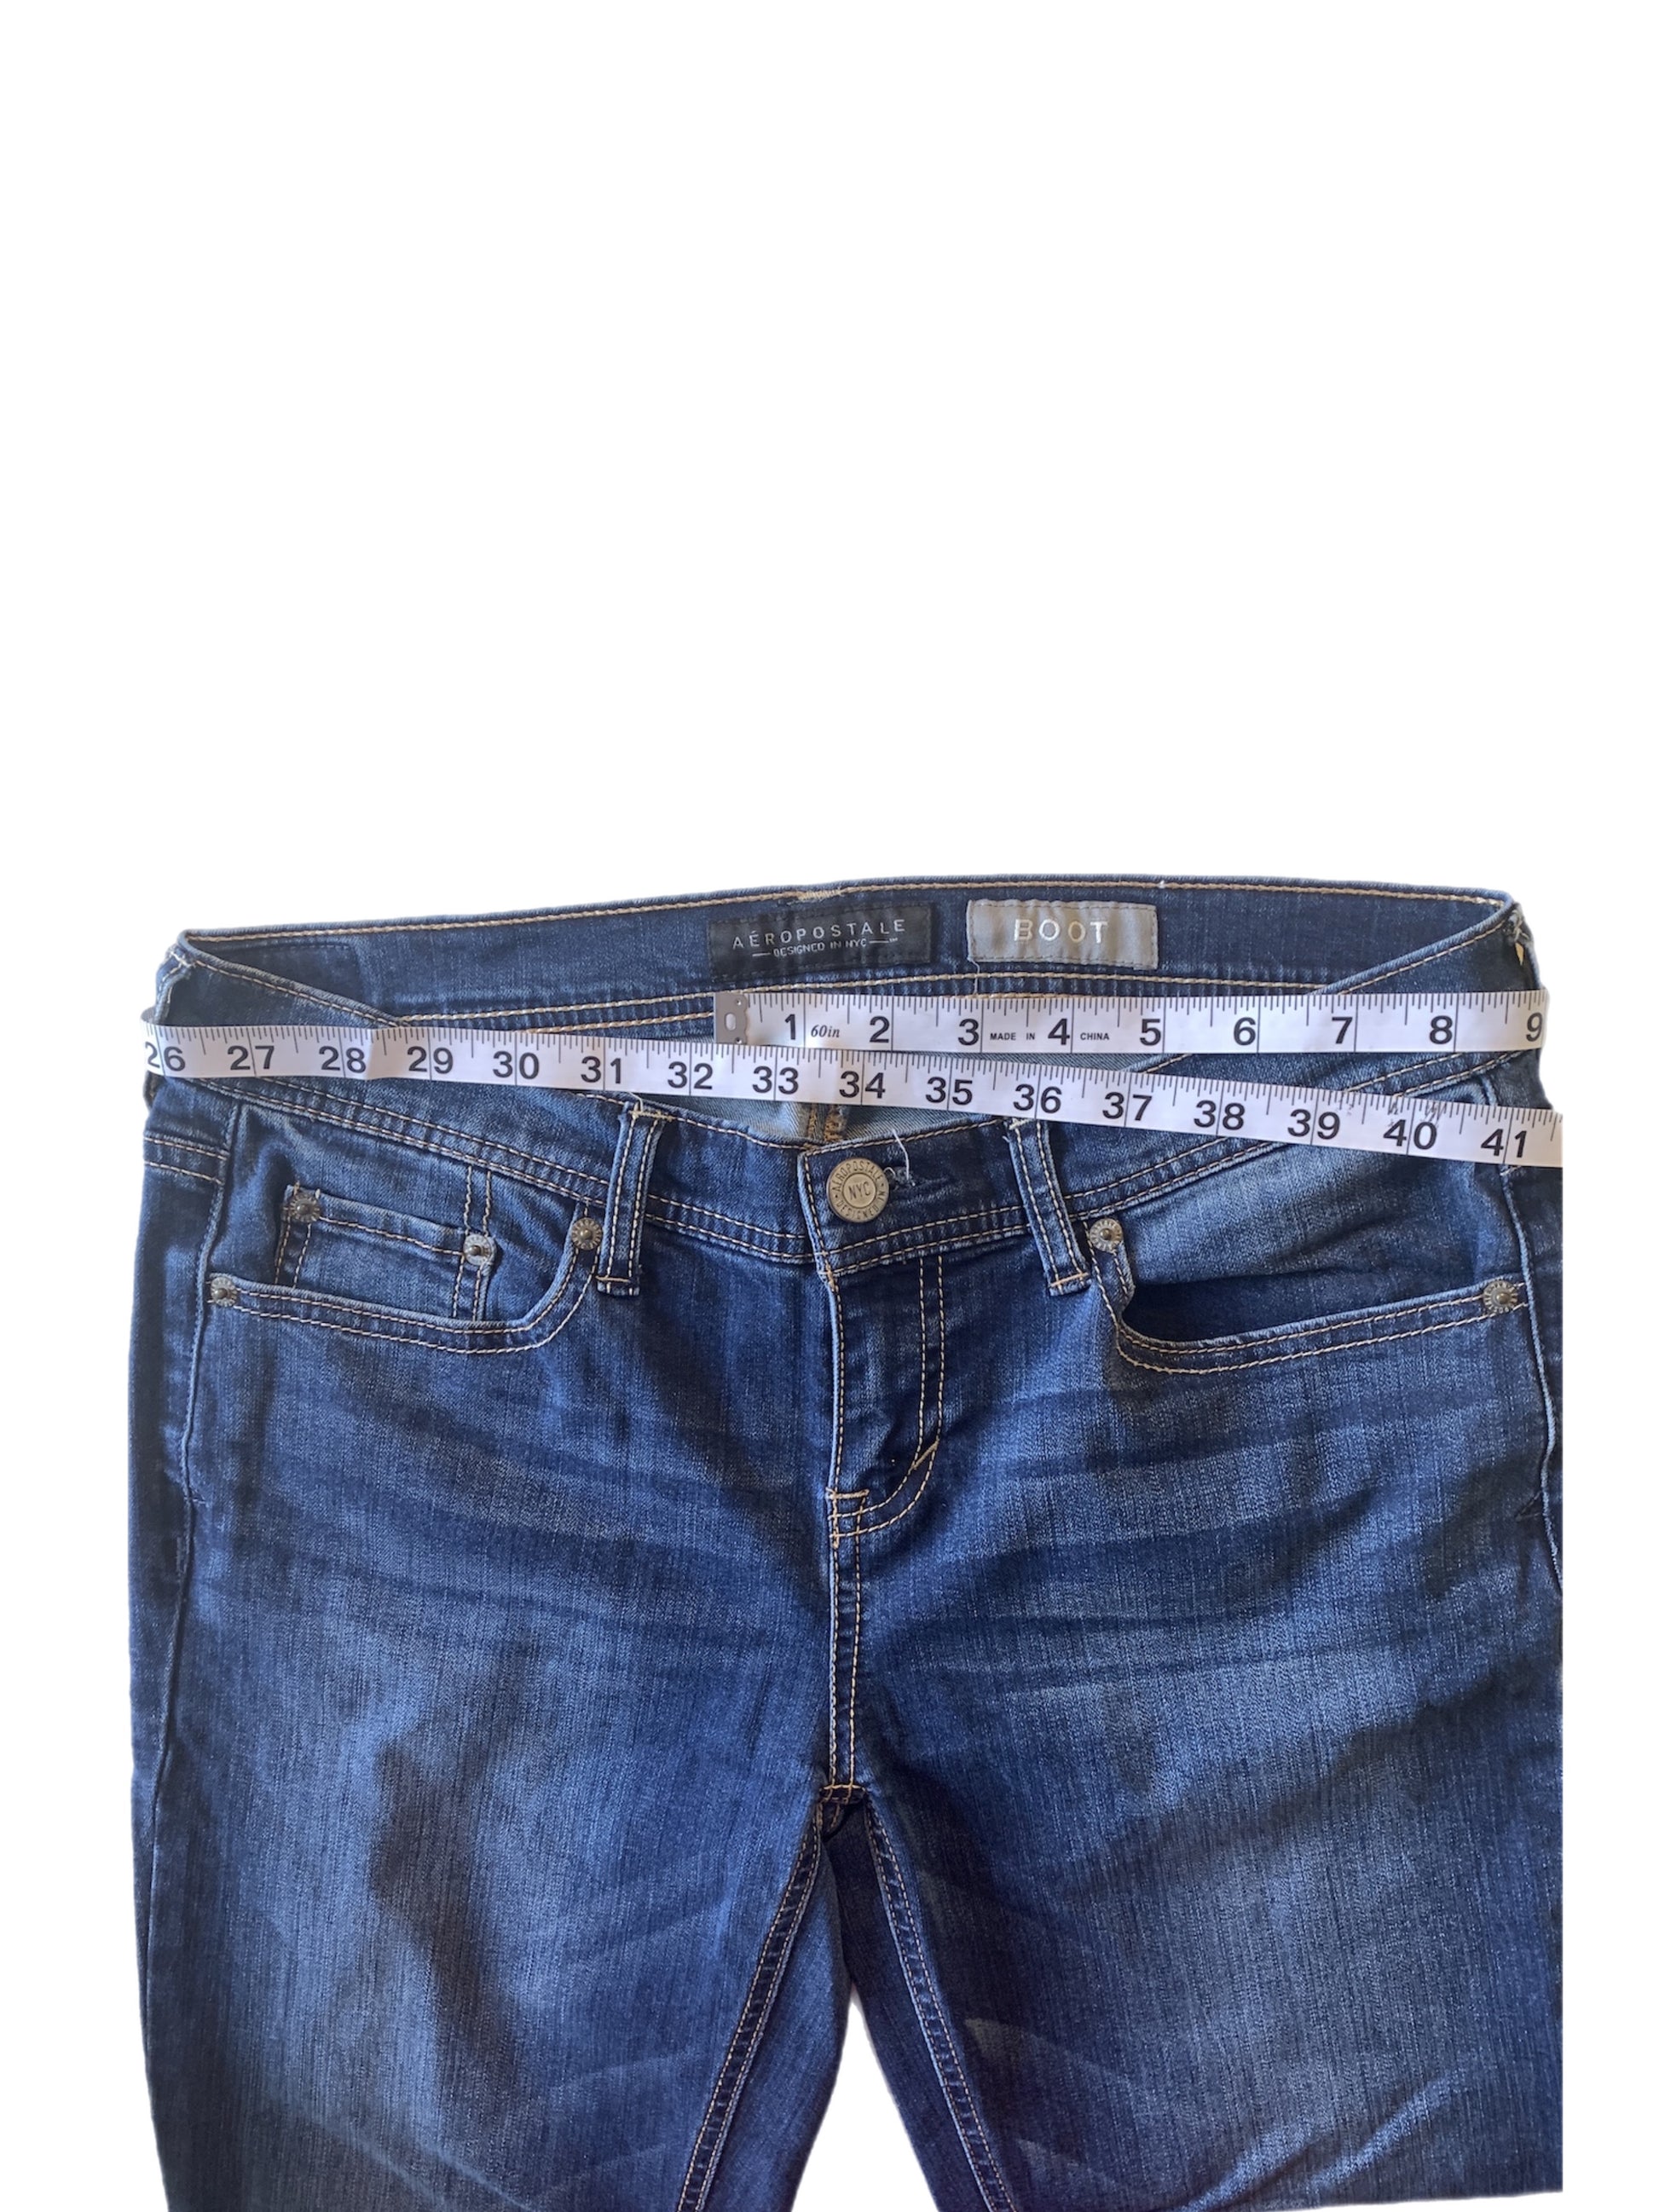 Aeropostale Mid-rise Bootcut Jeans – My Drawers R Full